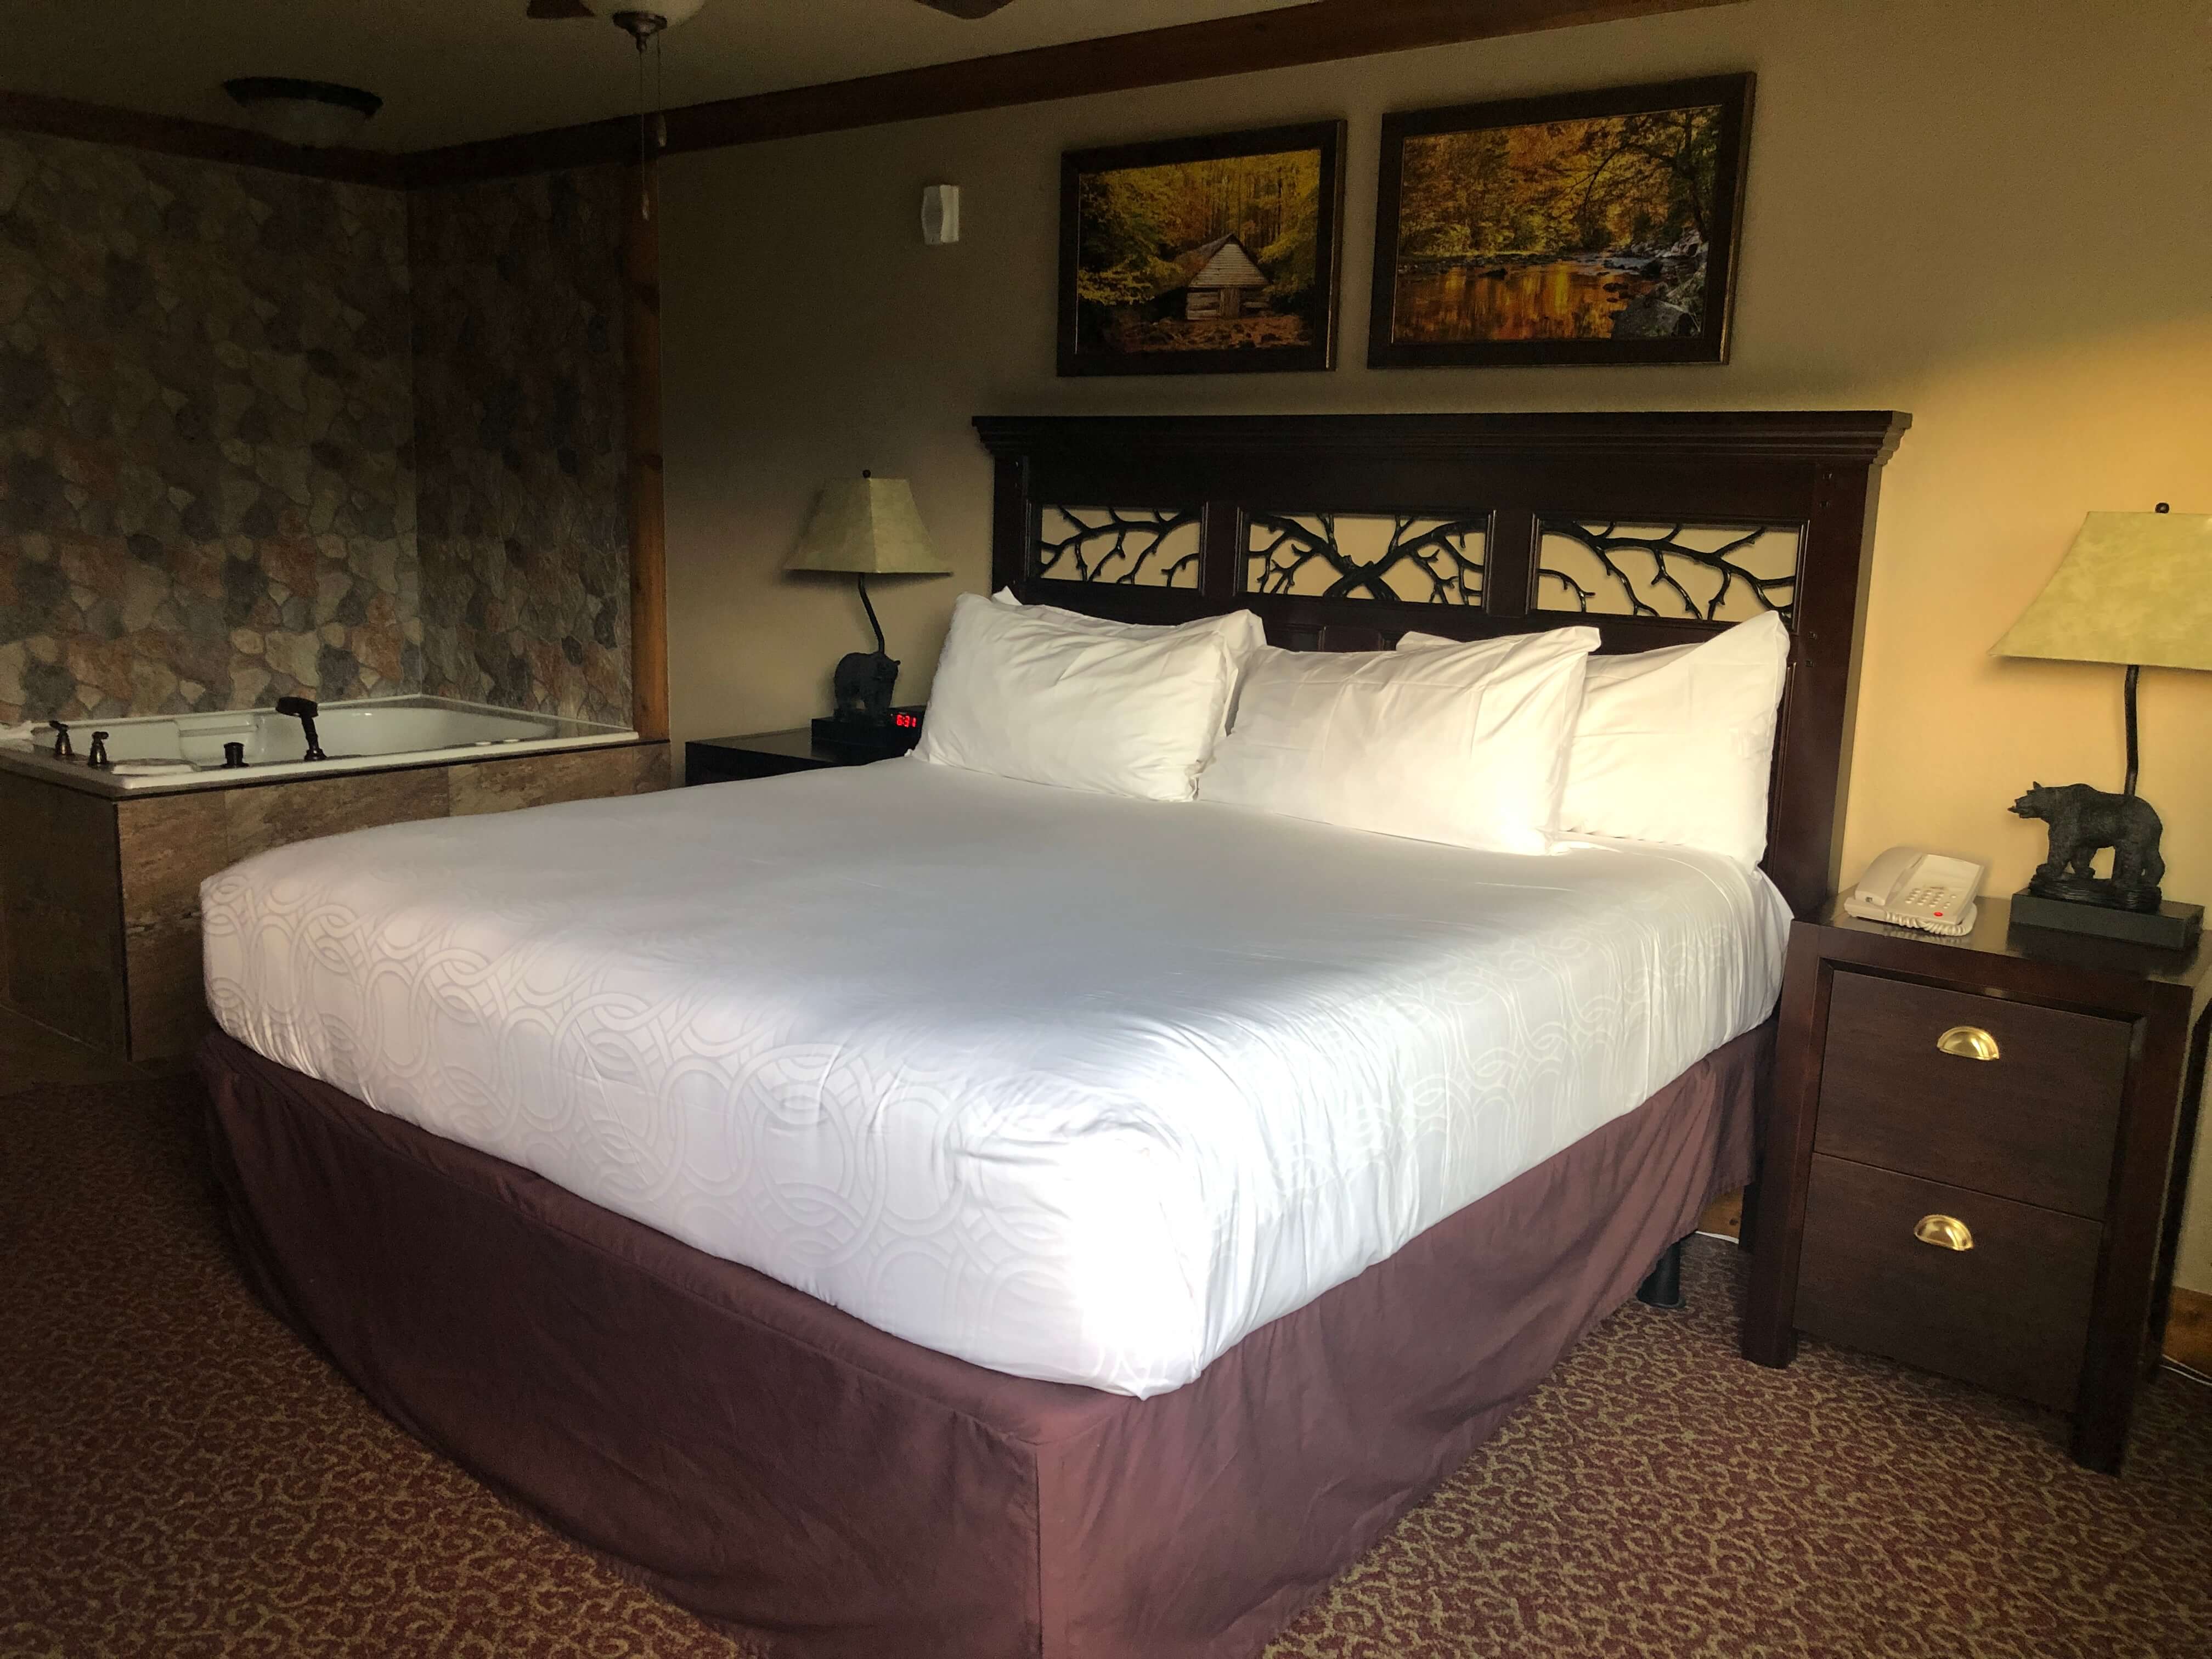 a king-sized bed in a lodge-themed room with a large jacuzzi tub